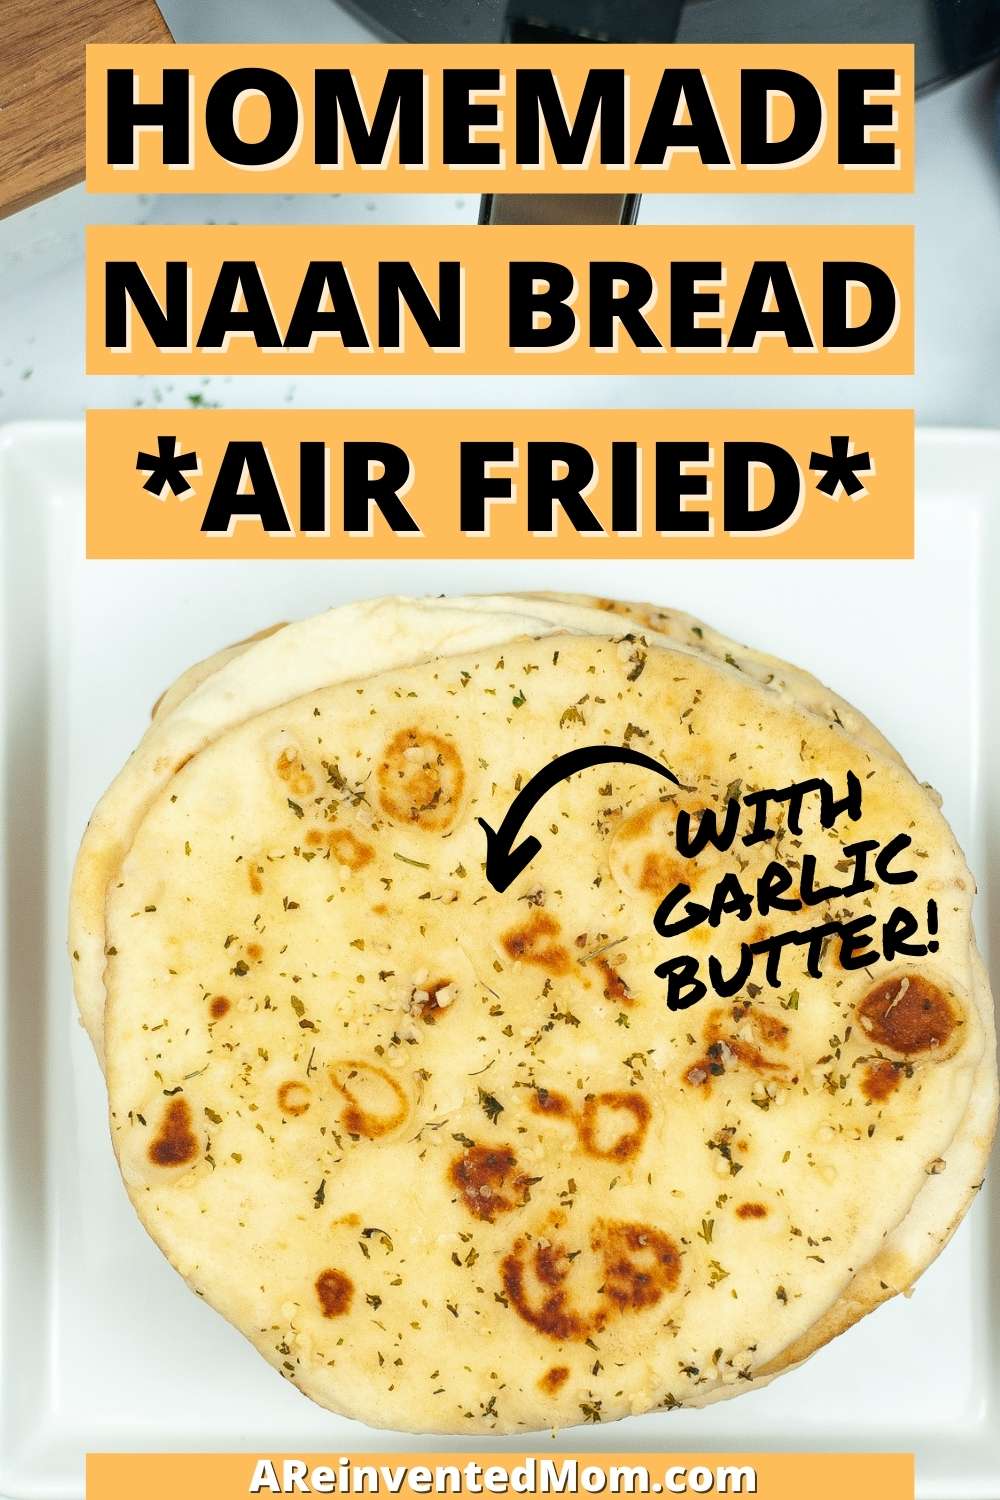 Overhead view of a stack of air fried naan bread with text overlay.